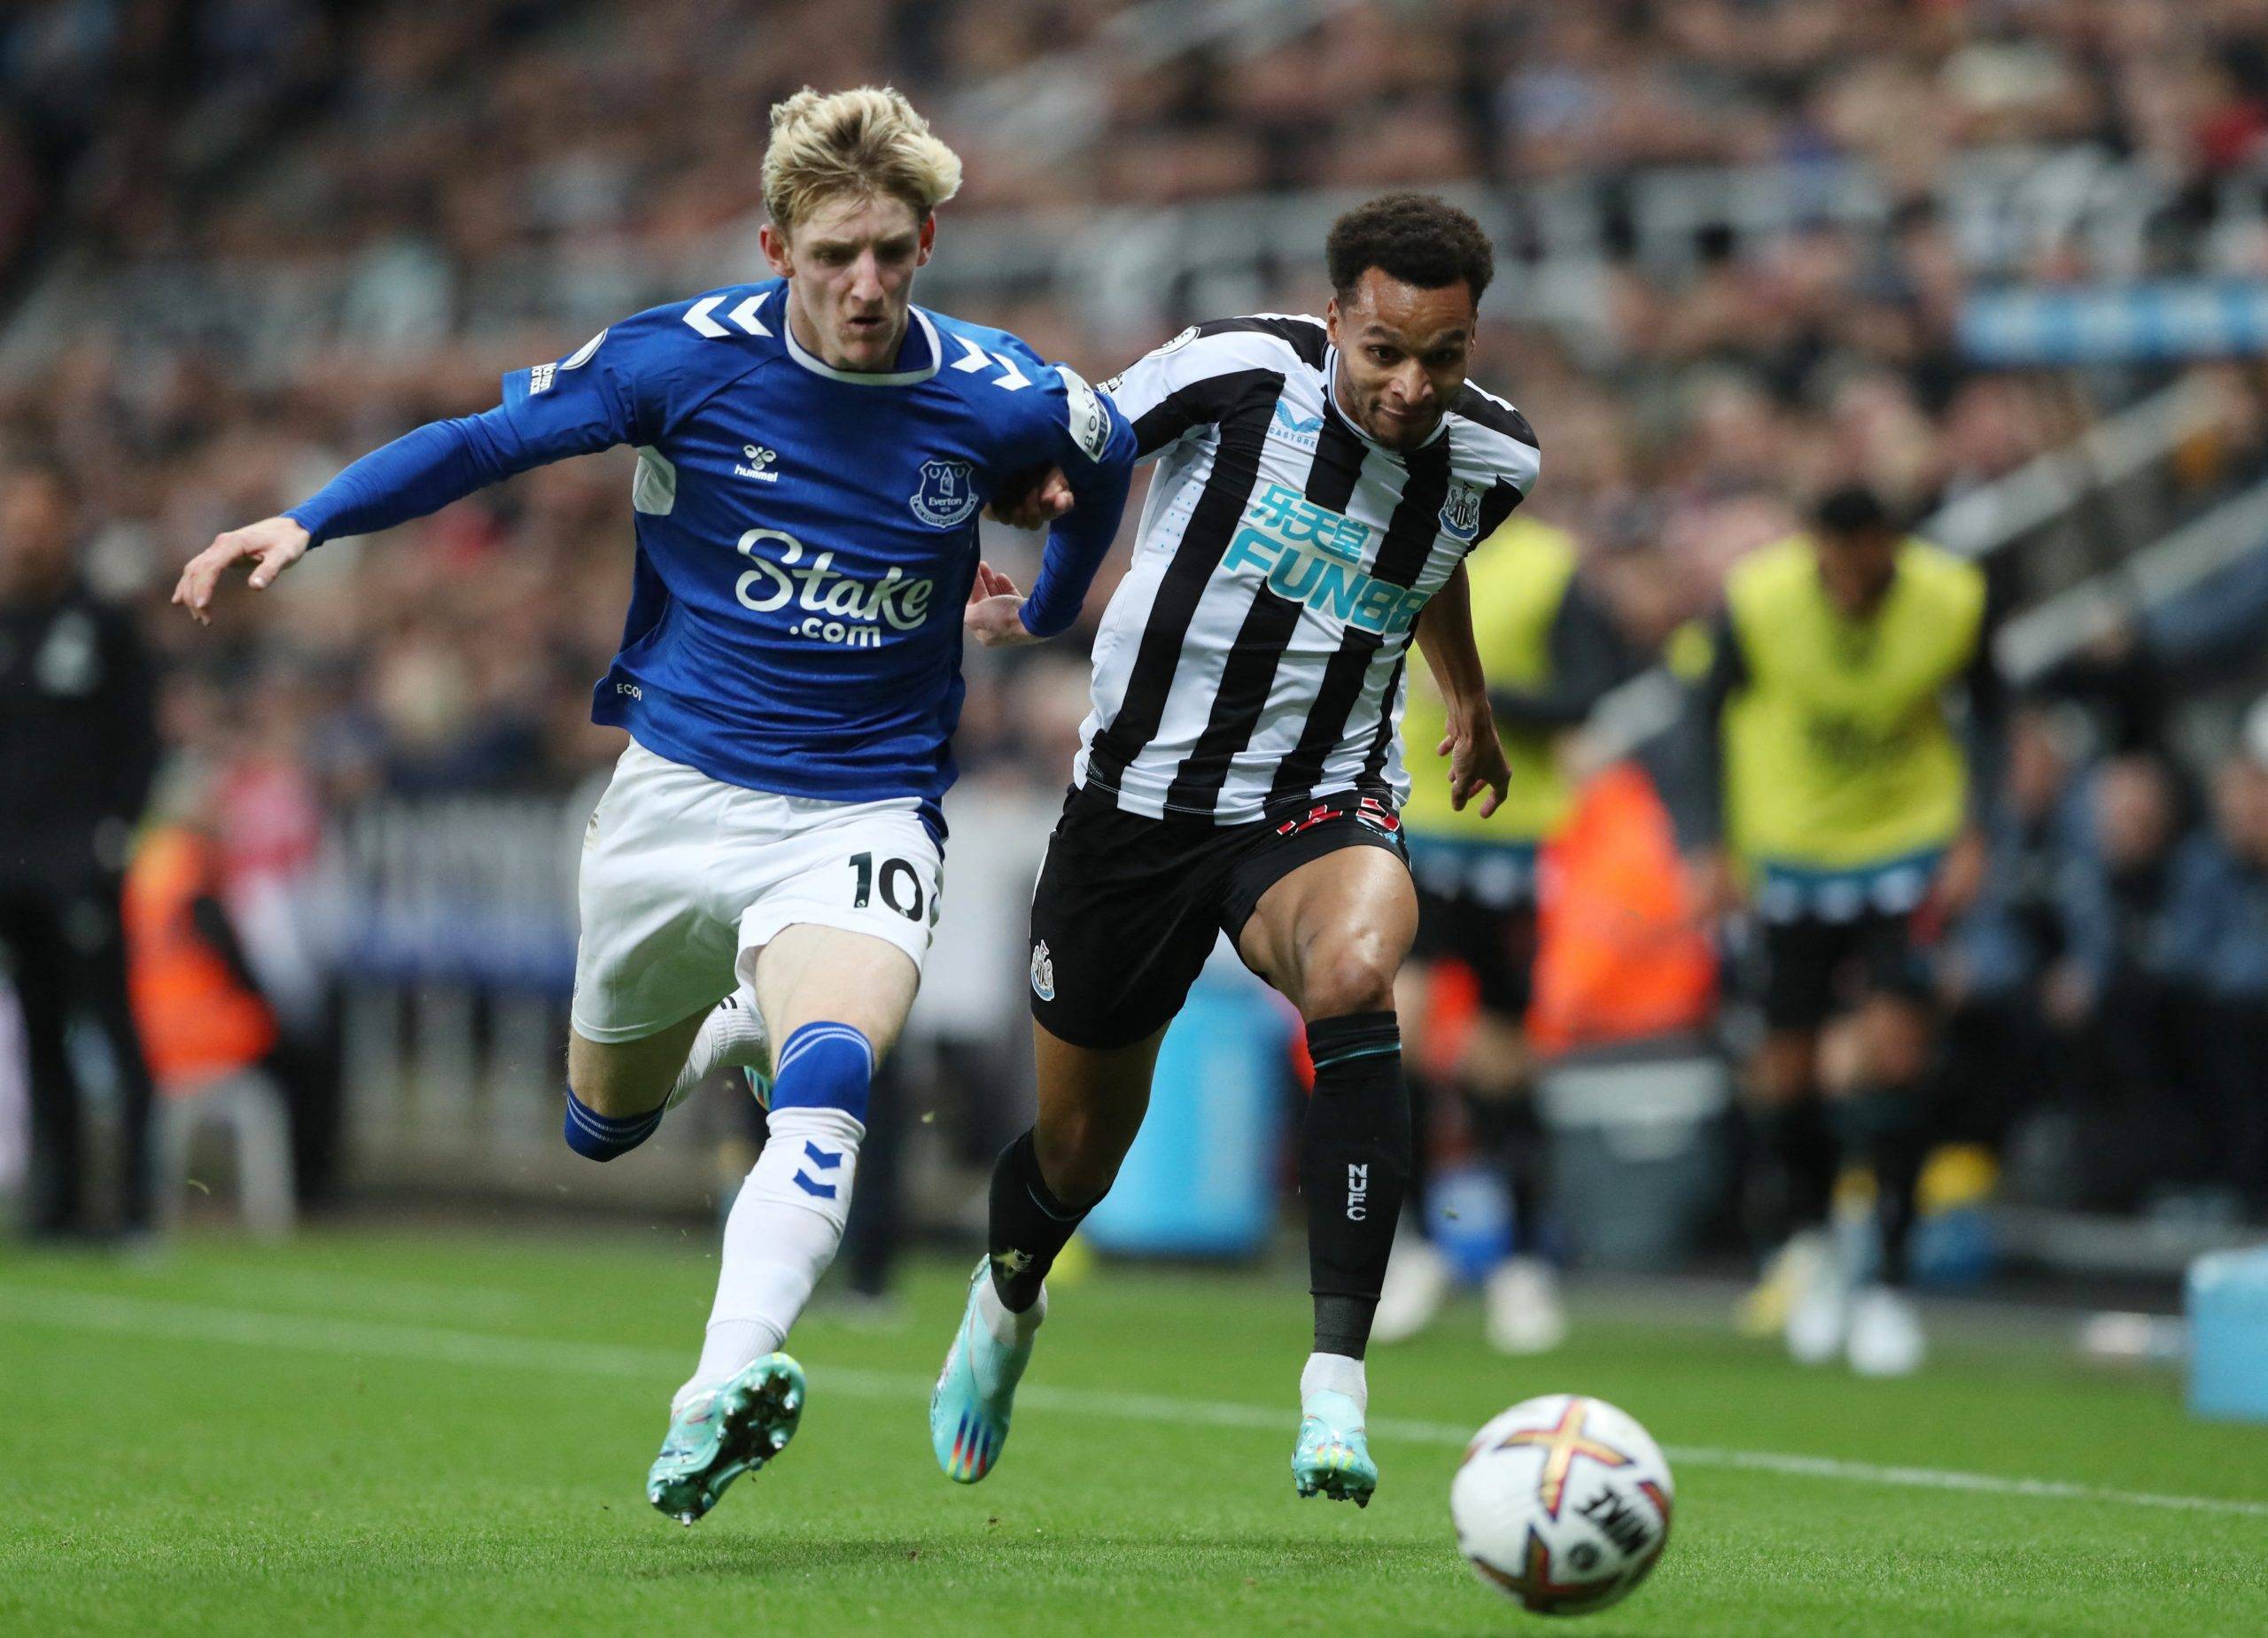 Newcastle likely to be without Anthony Gordon for a few weeks - Newcastle United News